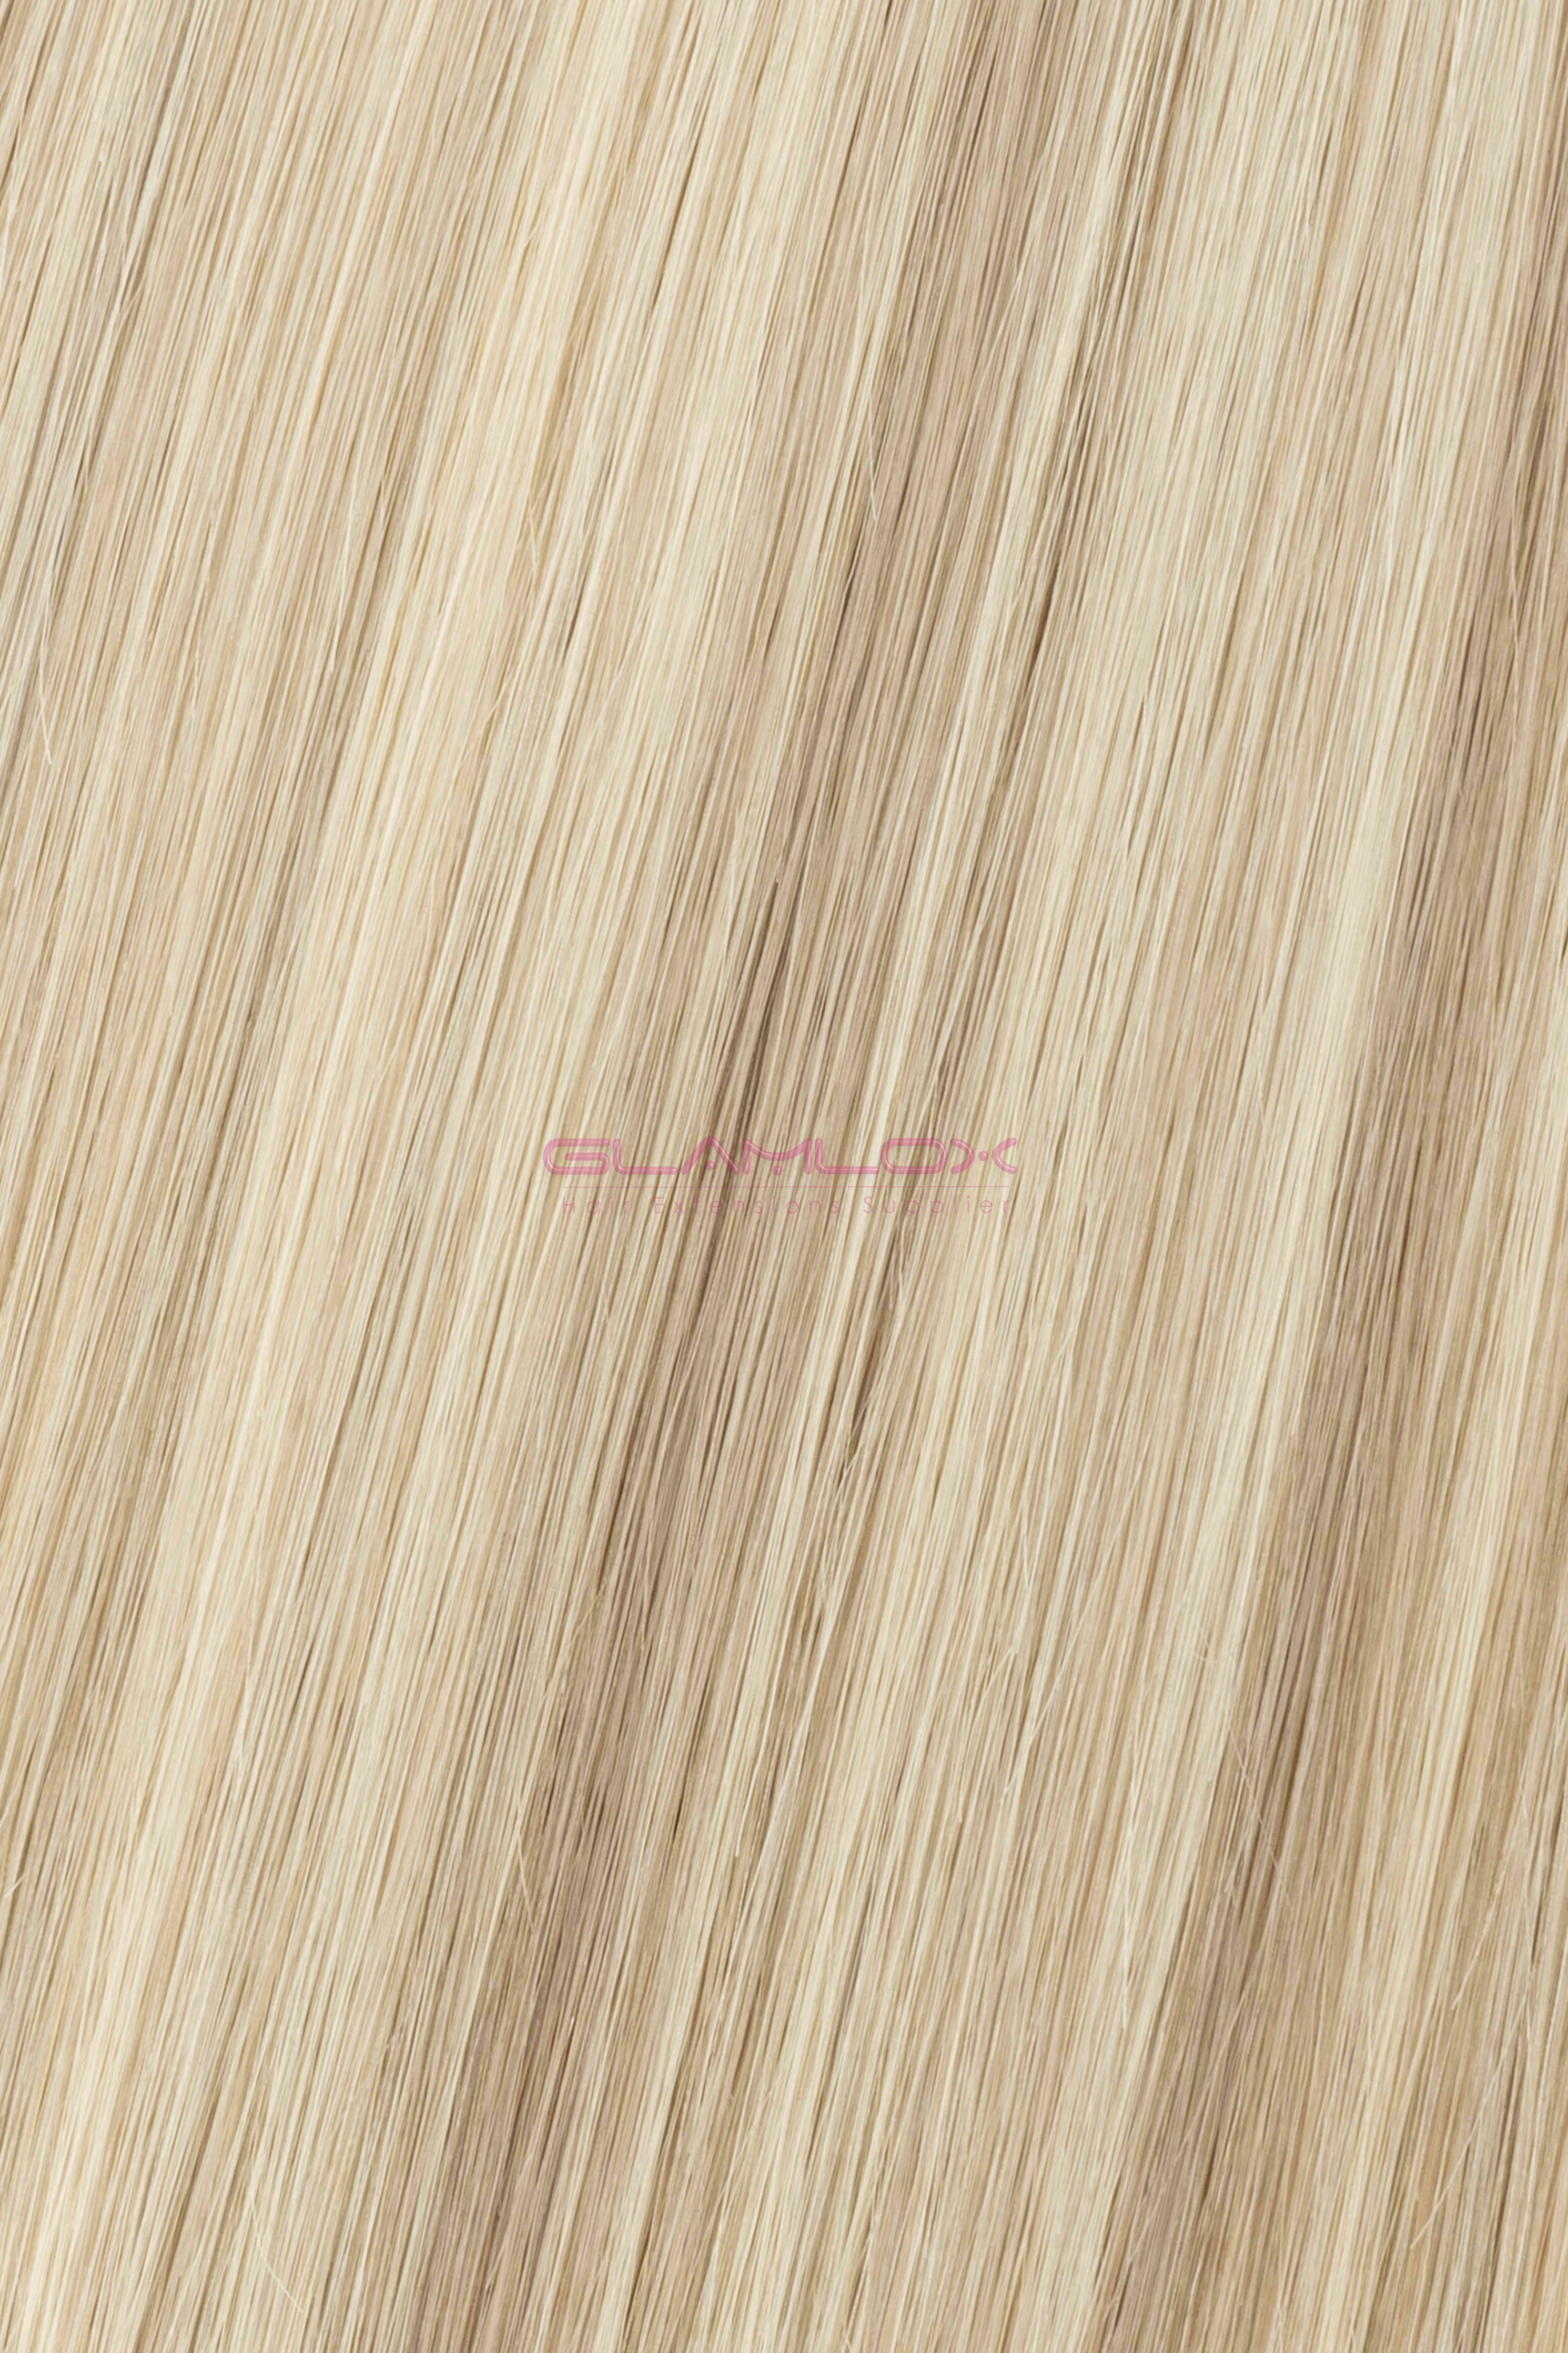 18" - 20" Ultra Weft Hair Extensions - Russian Mongolian Double Drawn Remy Human Hair